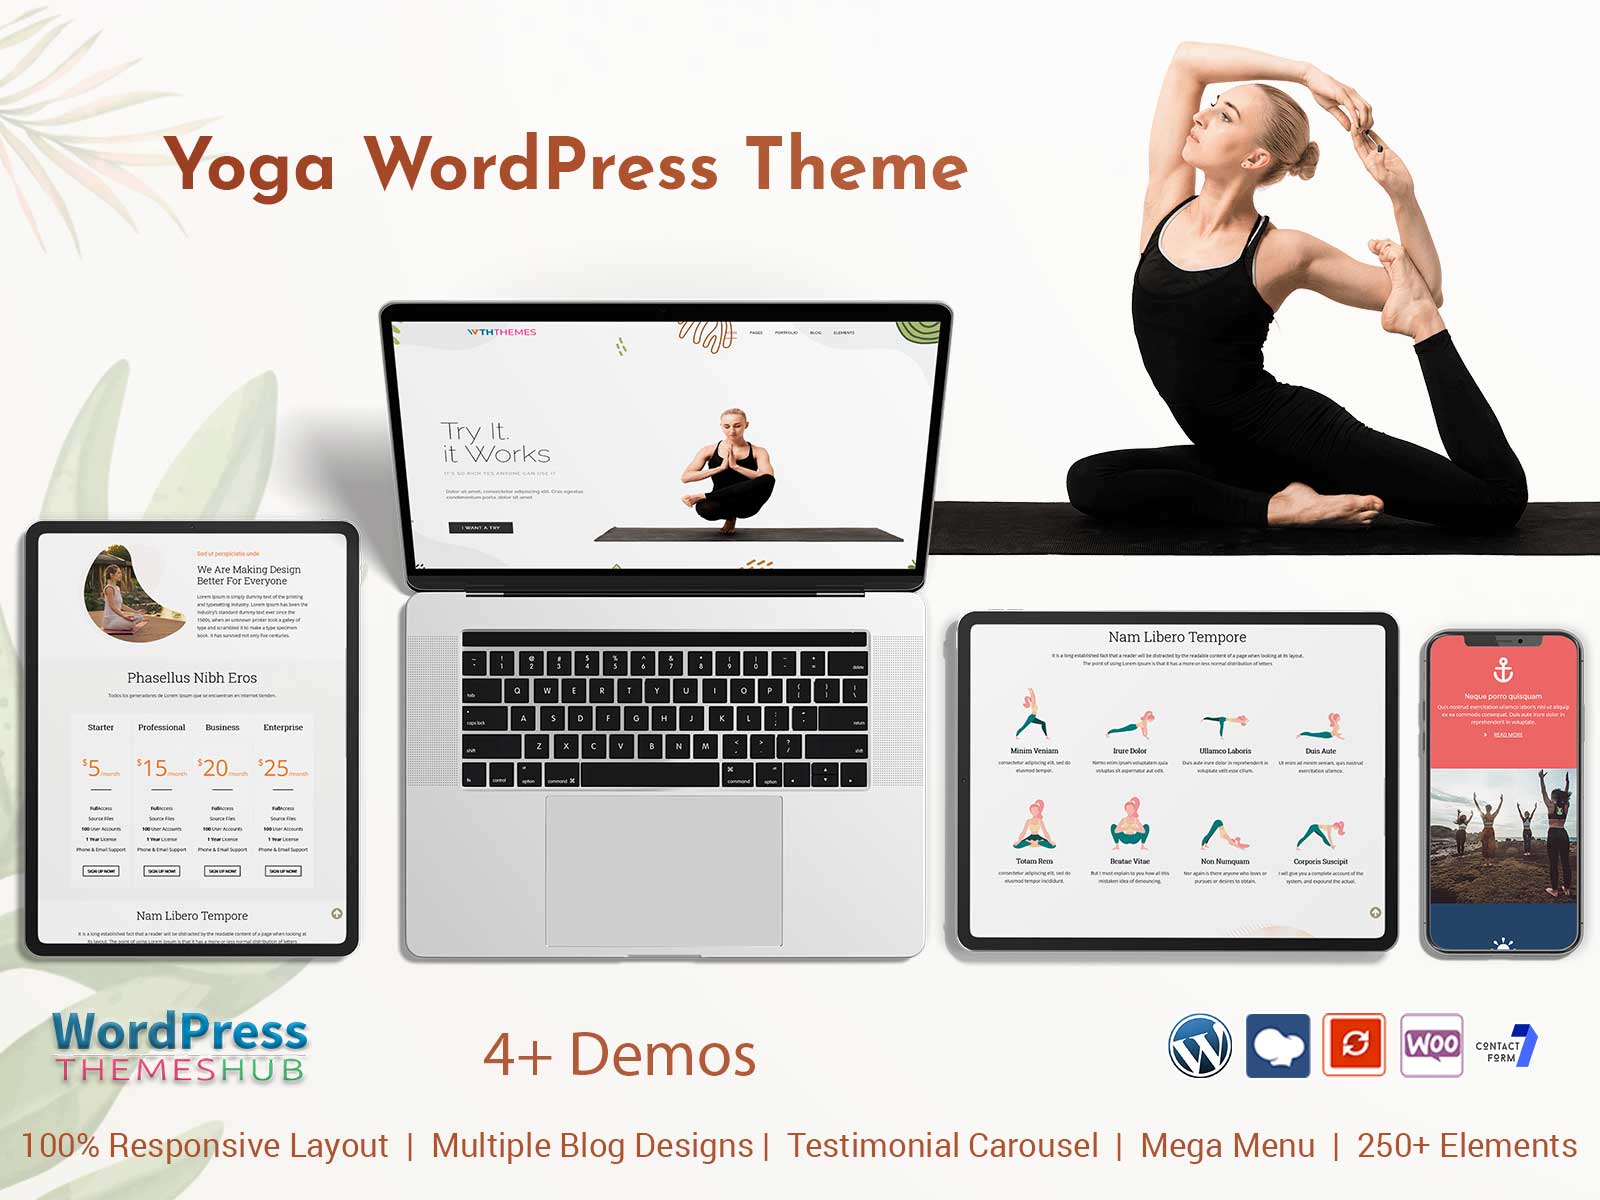 The Power Of Yoga: Transforming Your Website With Yoga WordPress Theme